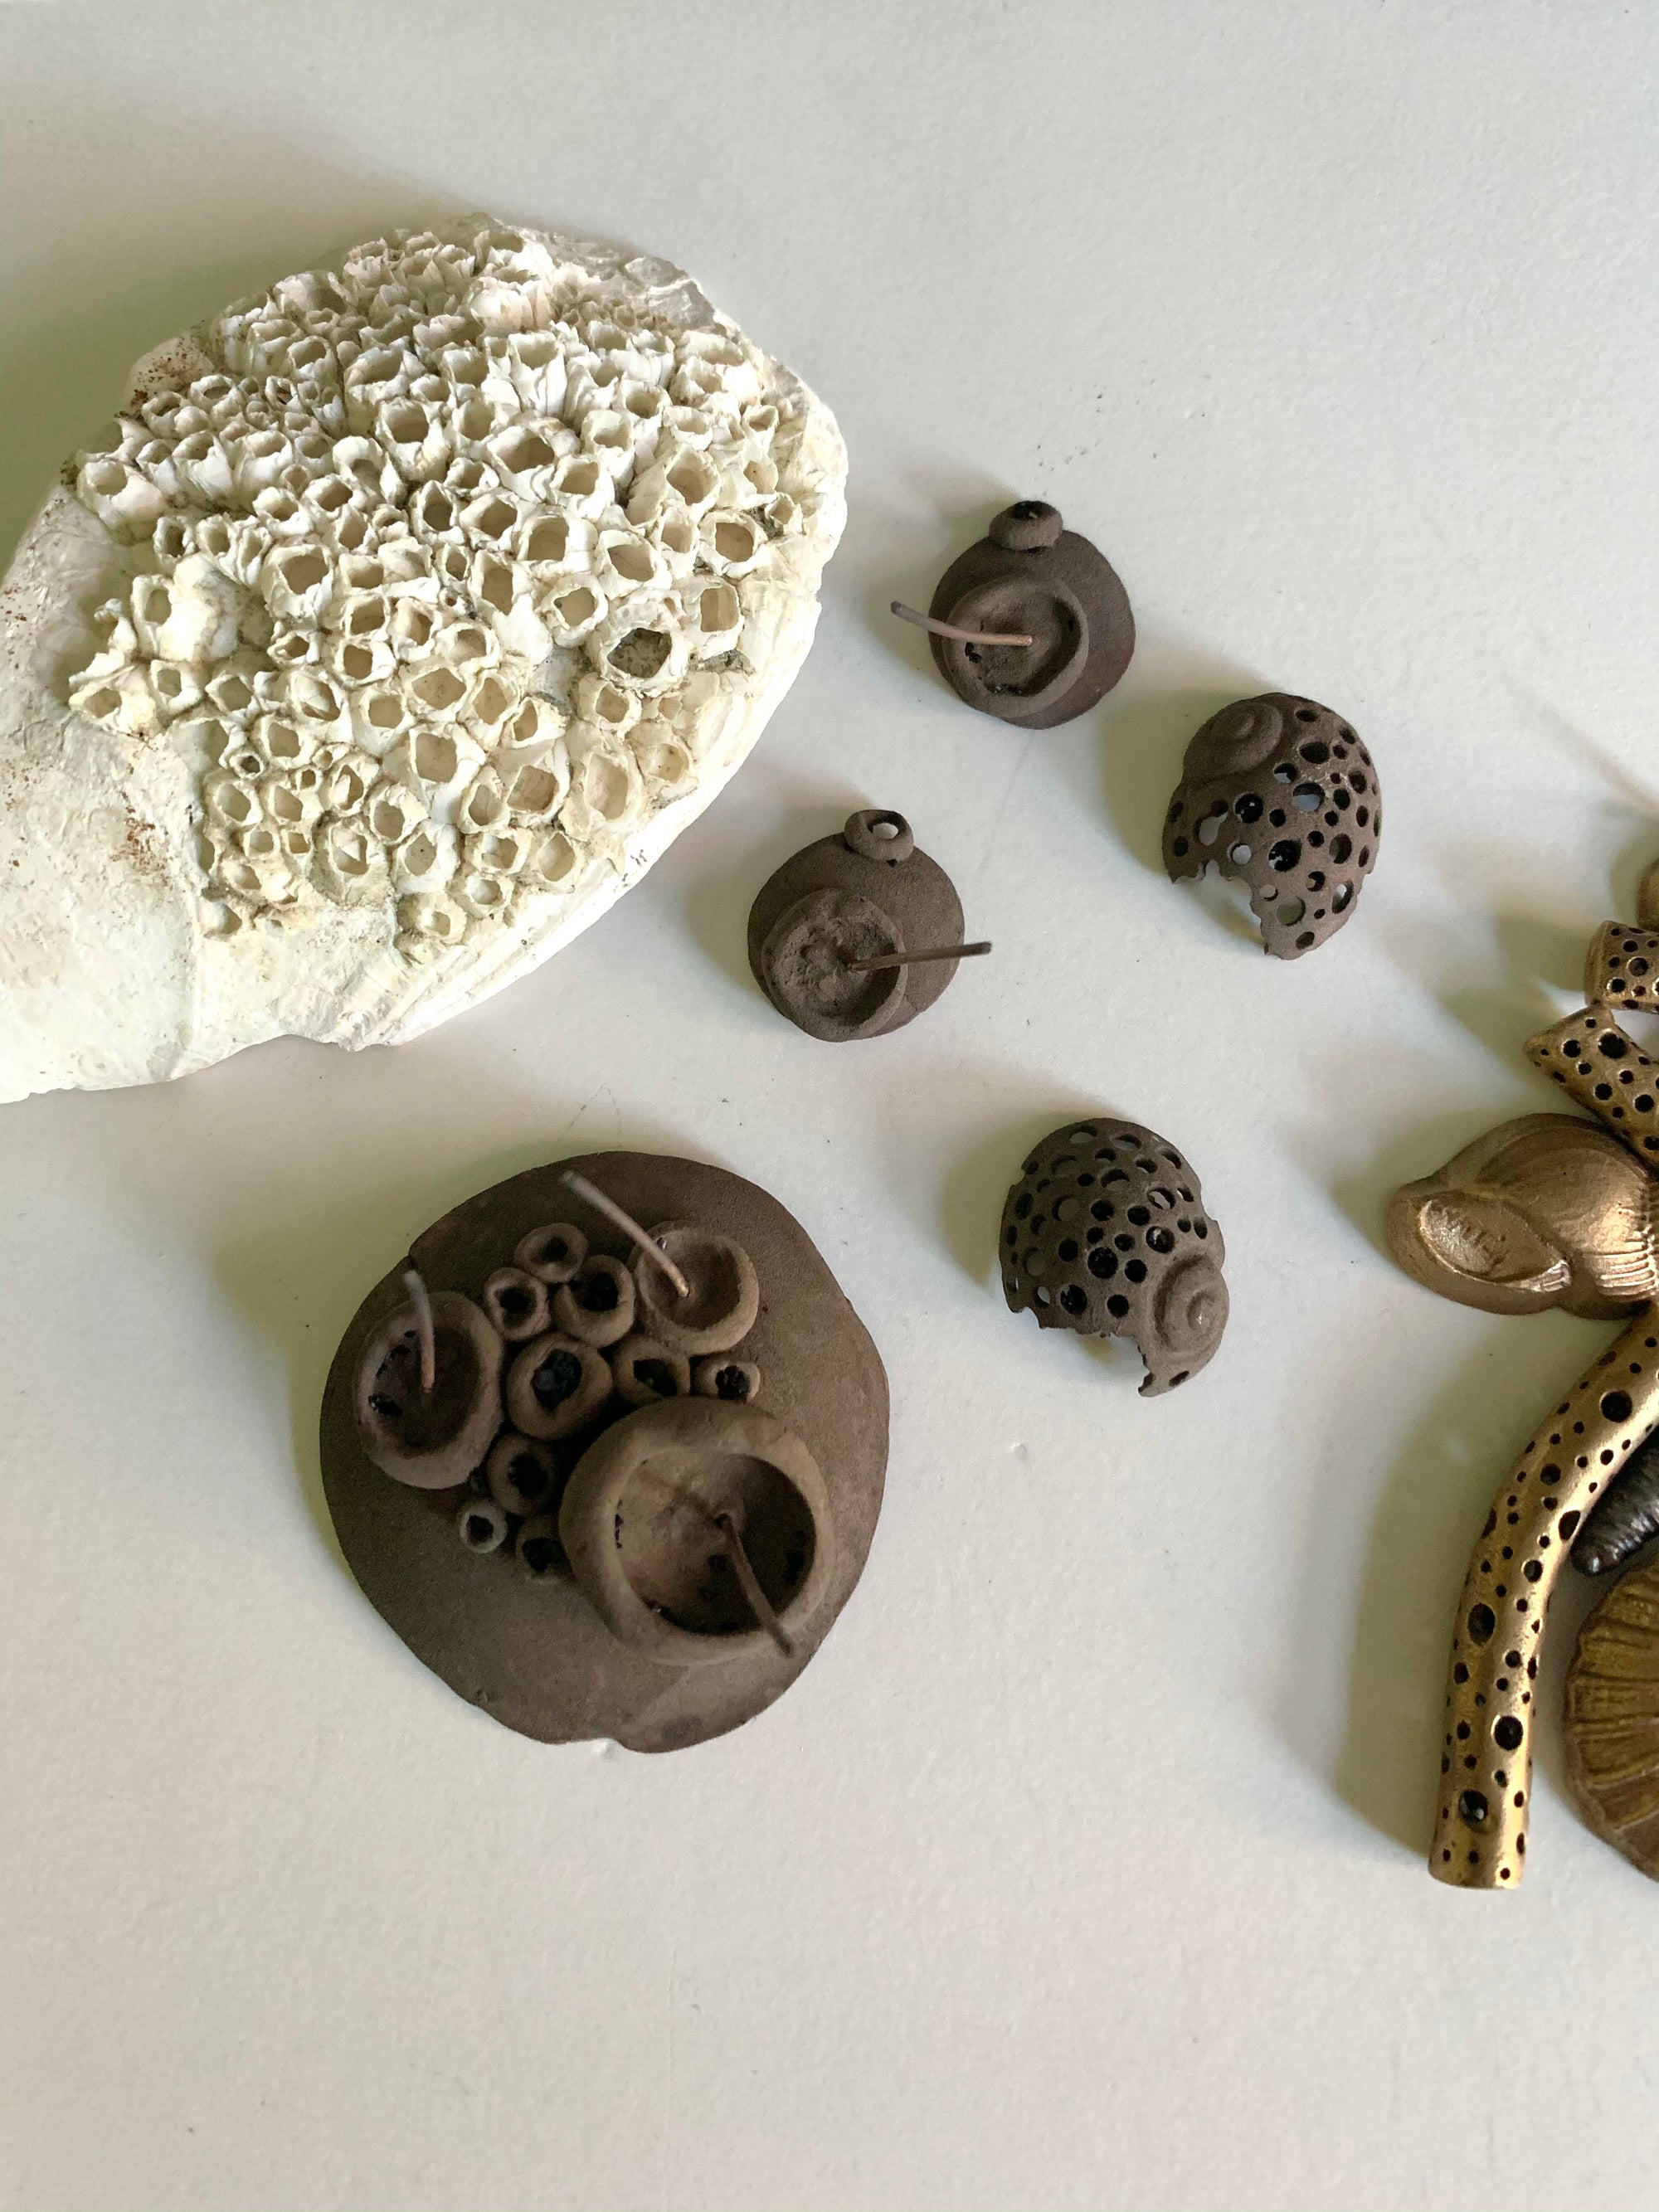 Barnacle seashell and new unpolished bronze jewelry work in process